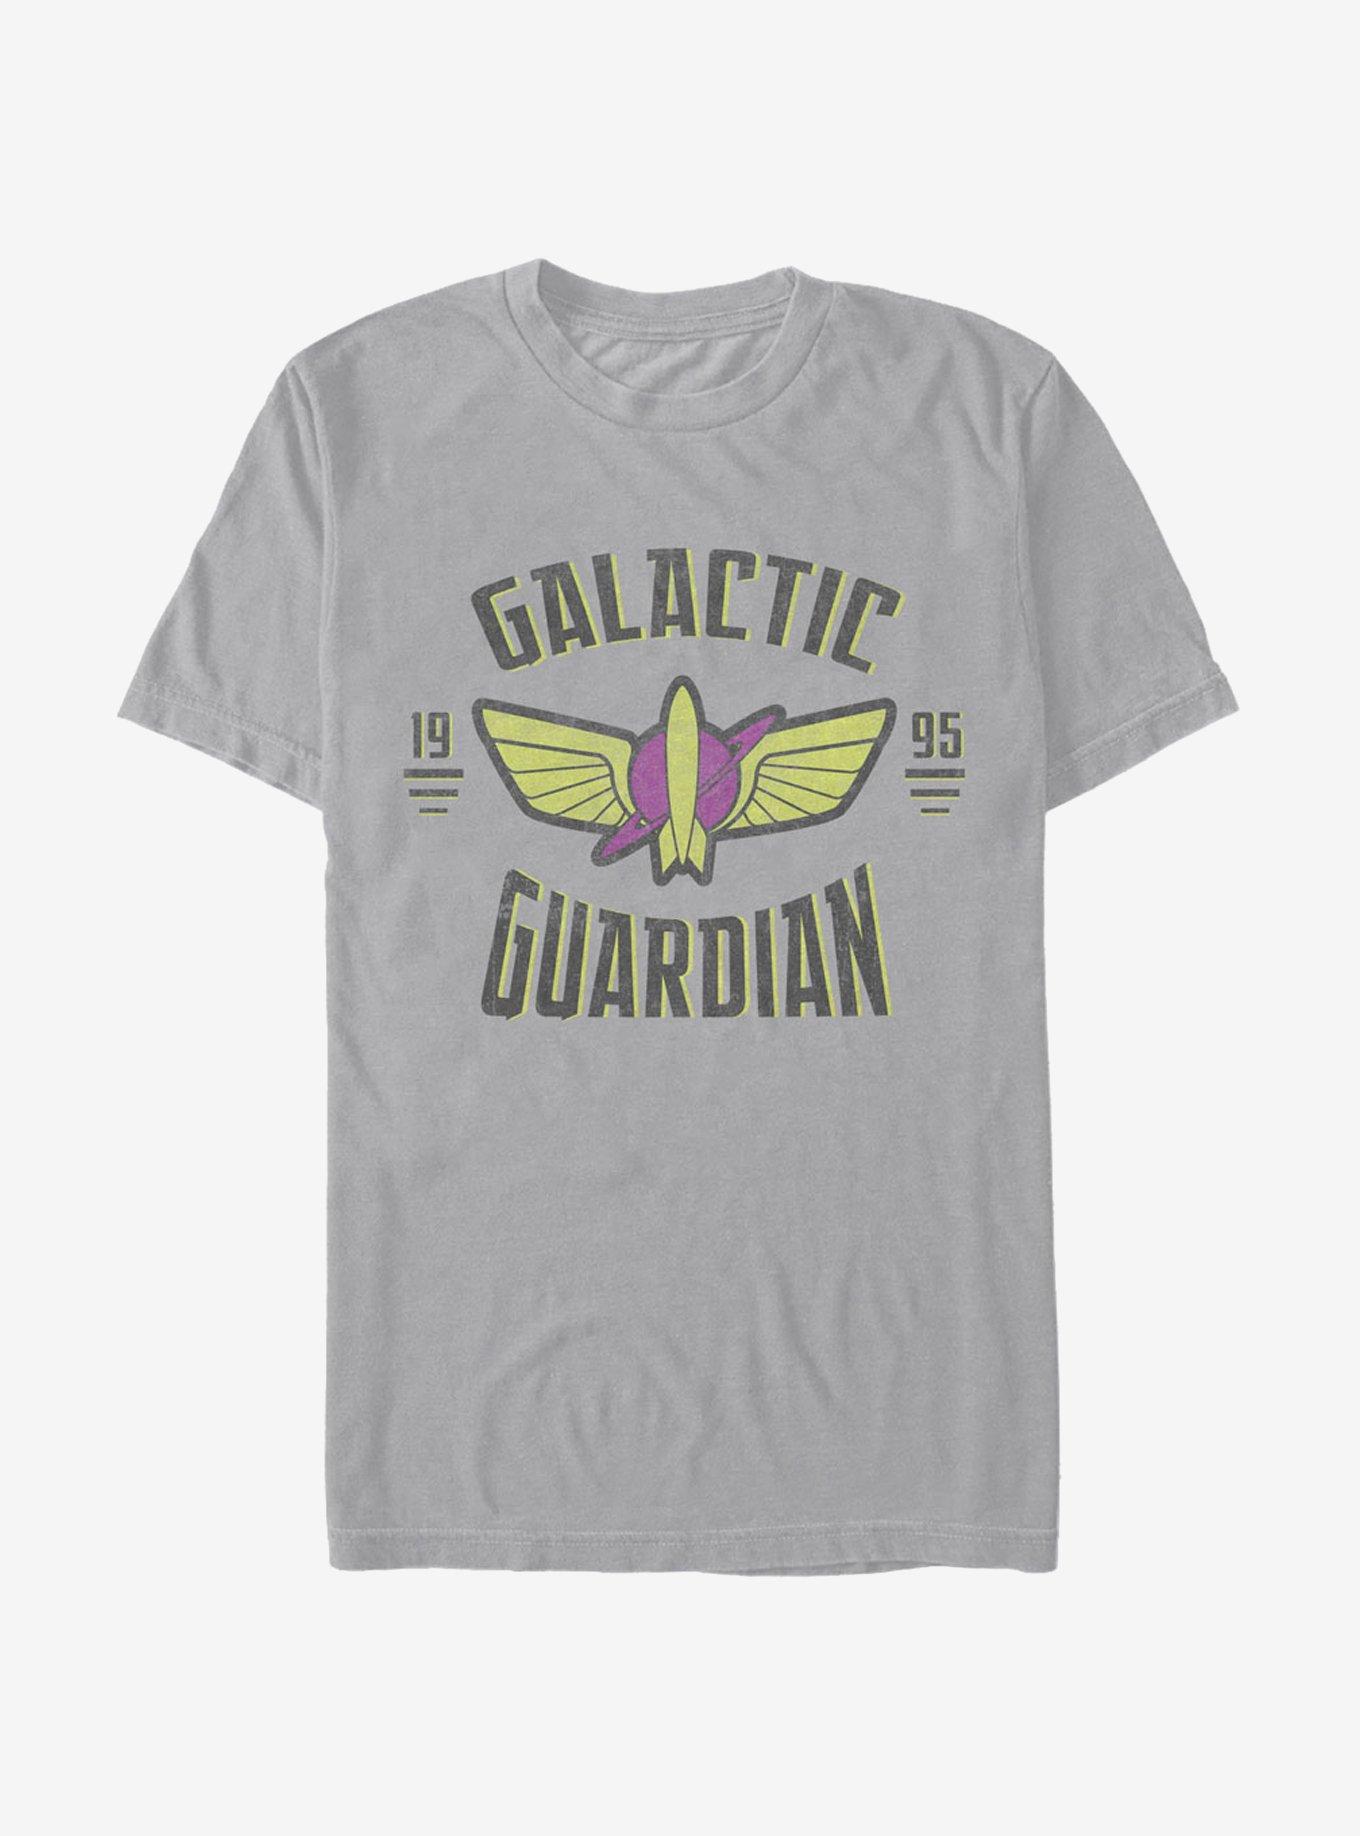 Toy Story Galactic Guardian 1995 T-Shirt, SILVER, hi-res